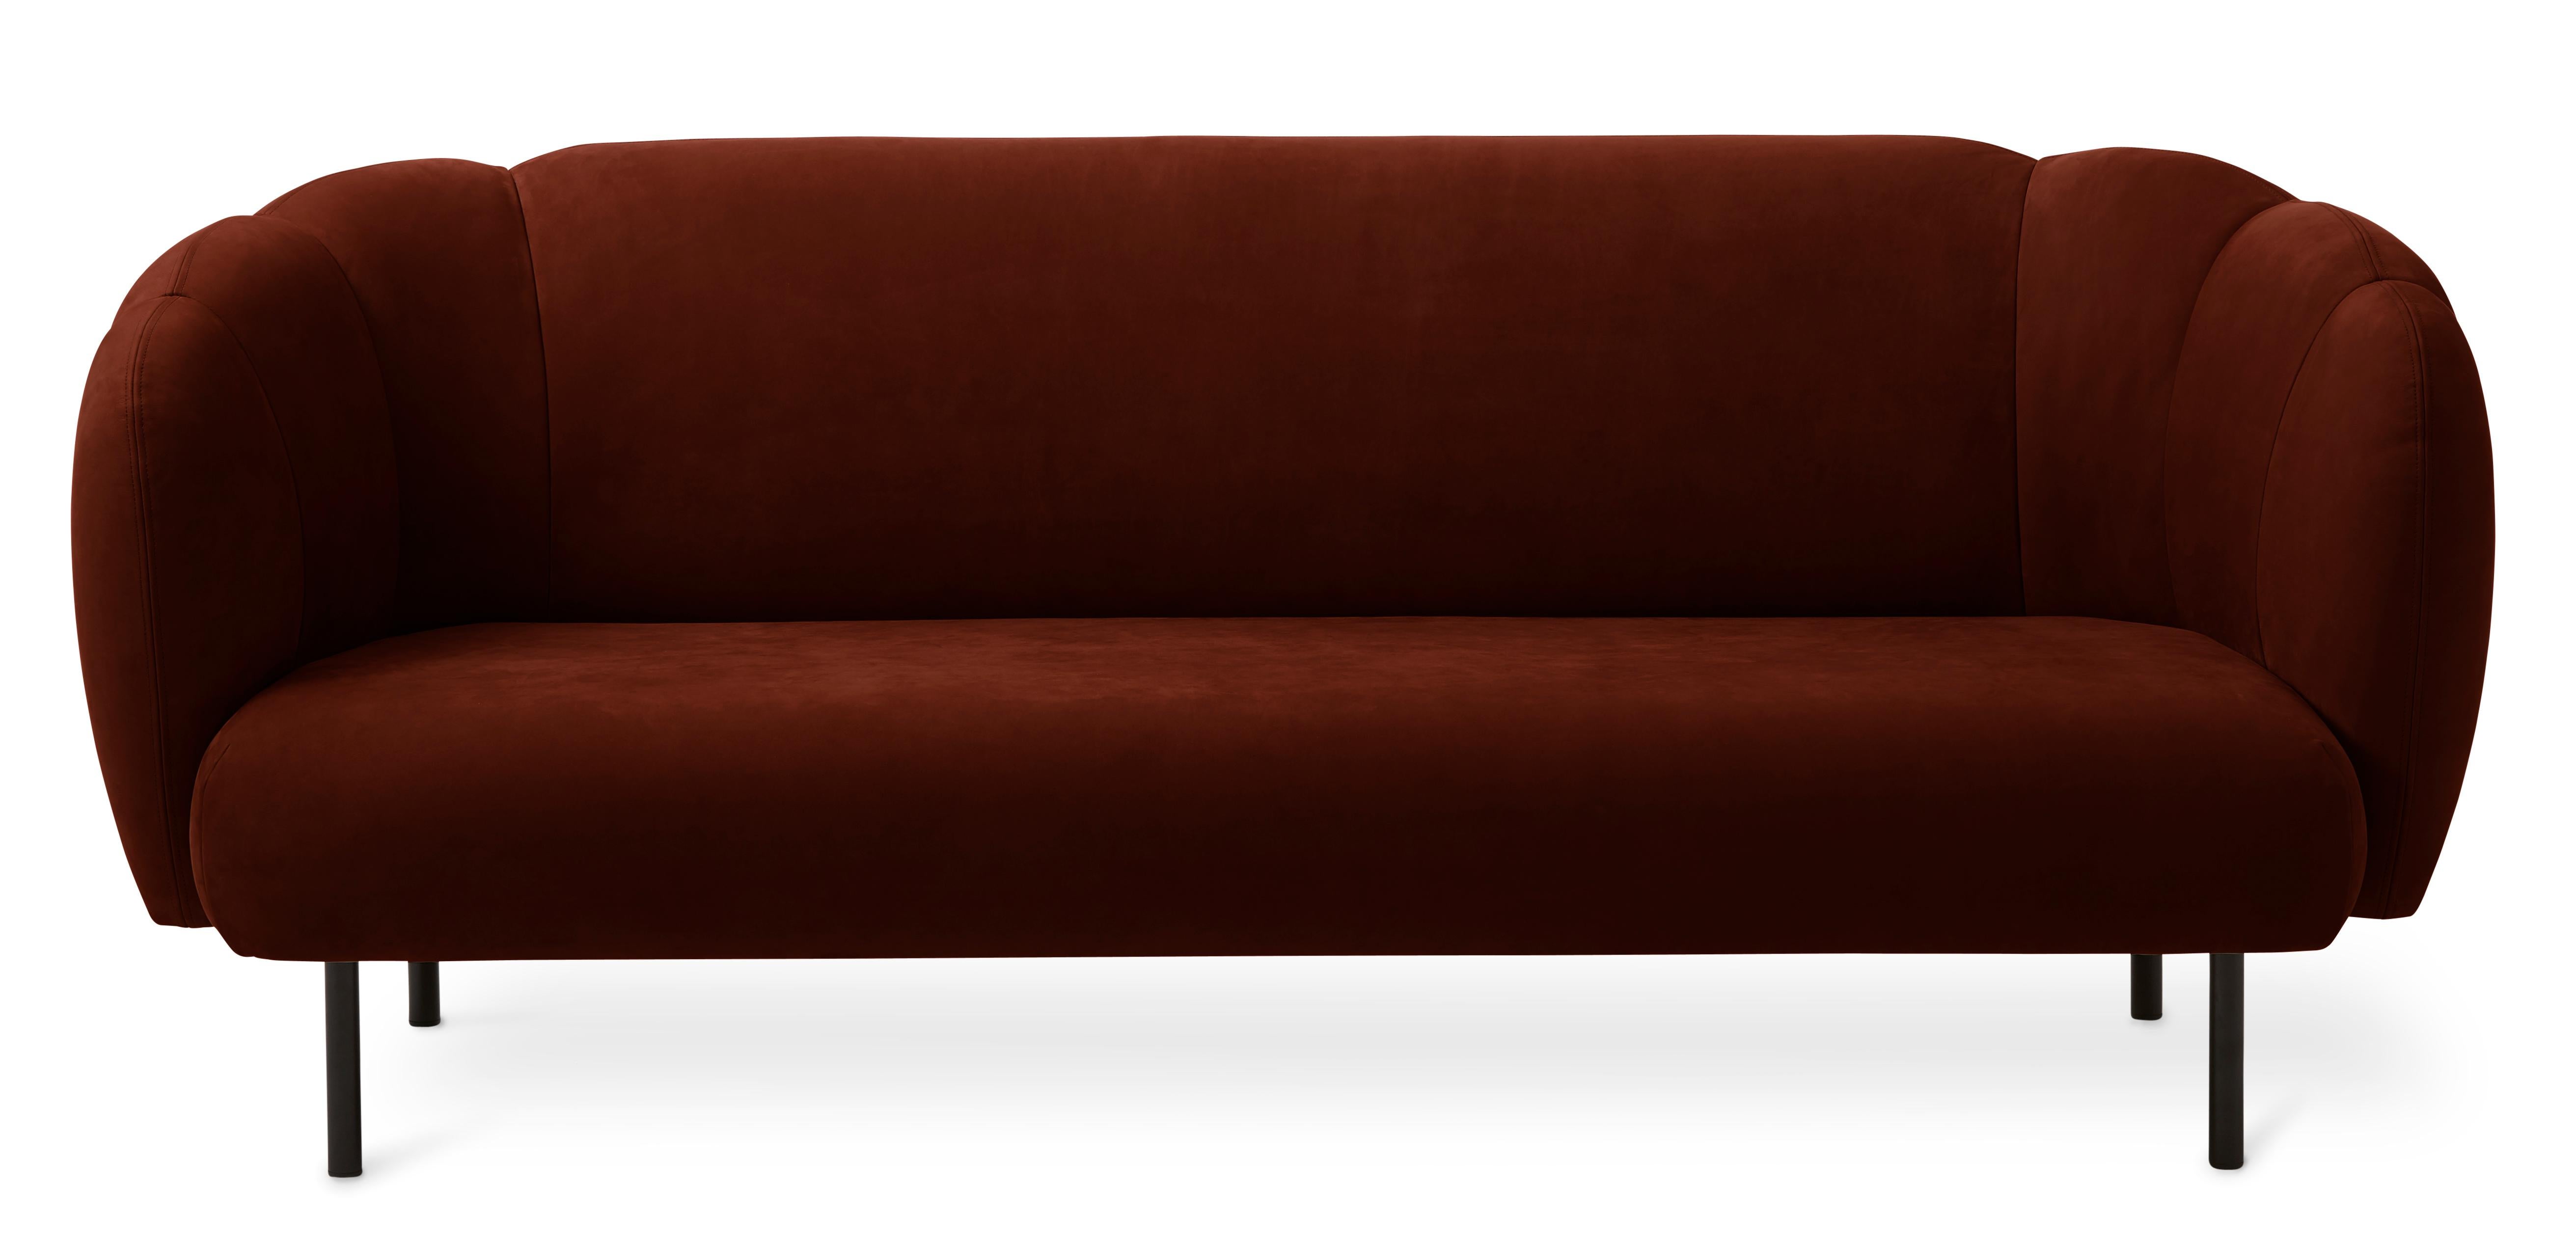 For Sale: Brown (Nabuk Terra) Cape 3-Seat Stitch Sofa, by Charlotte Høncke from Warm Nordic